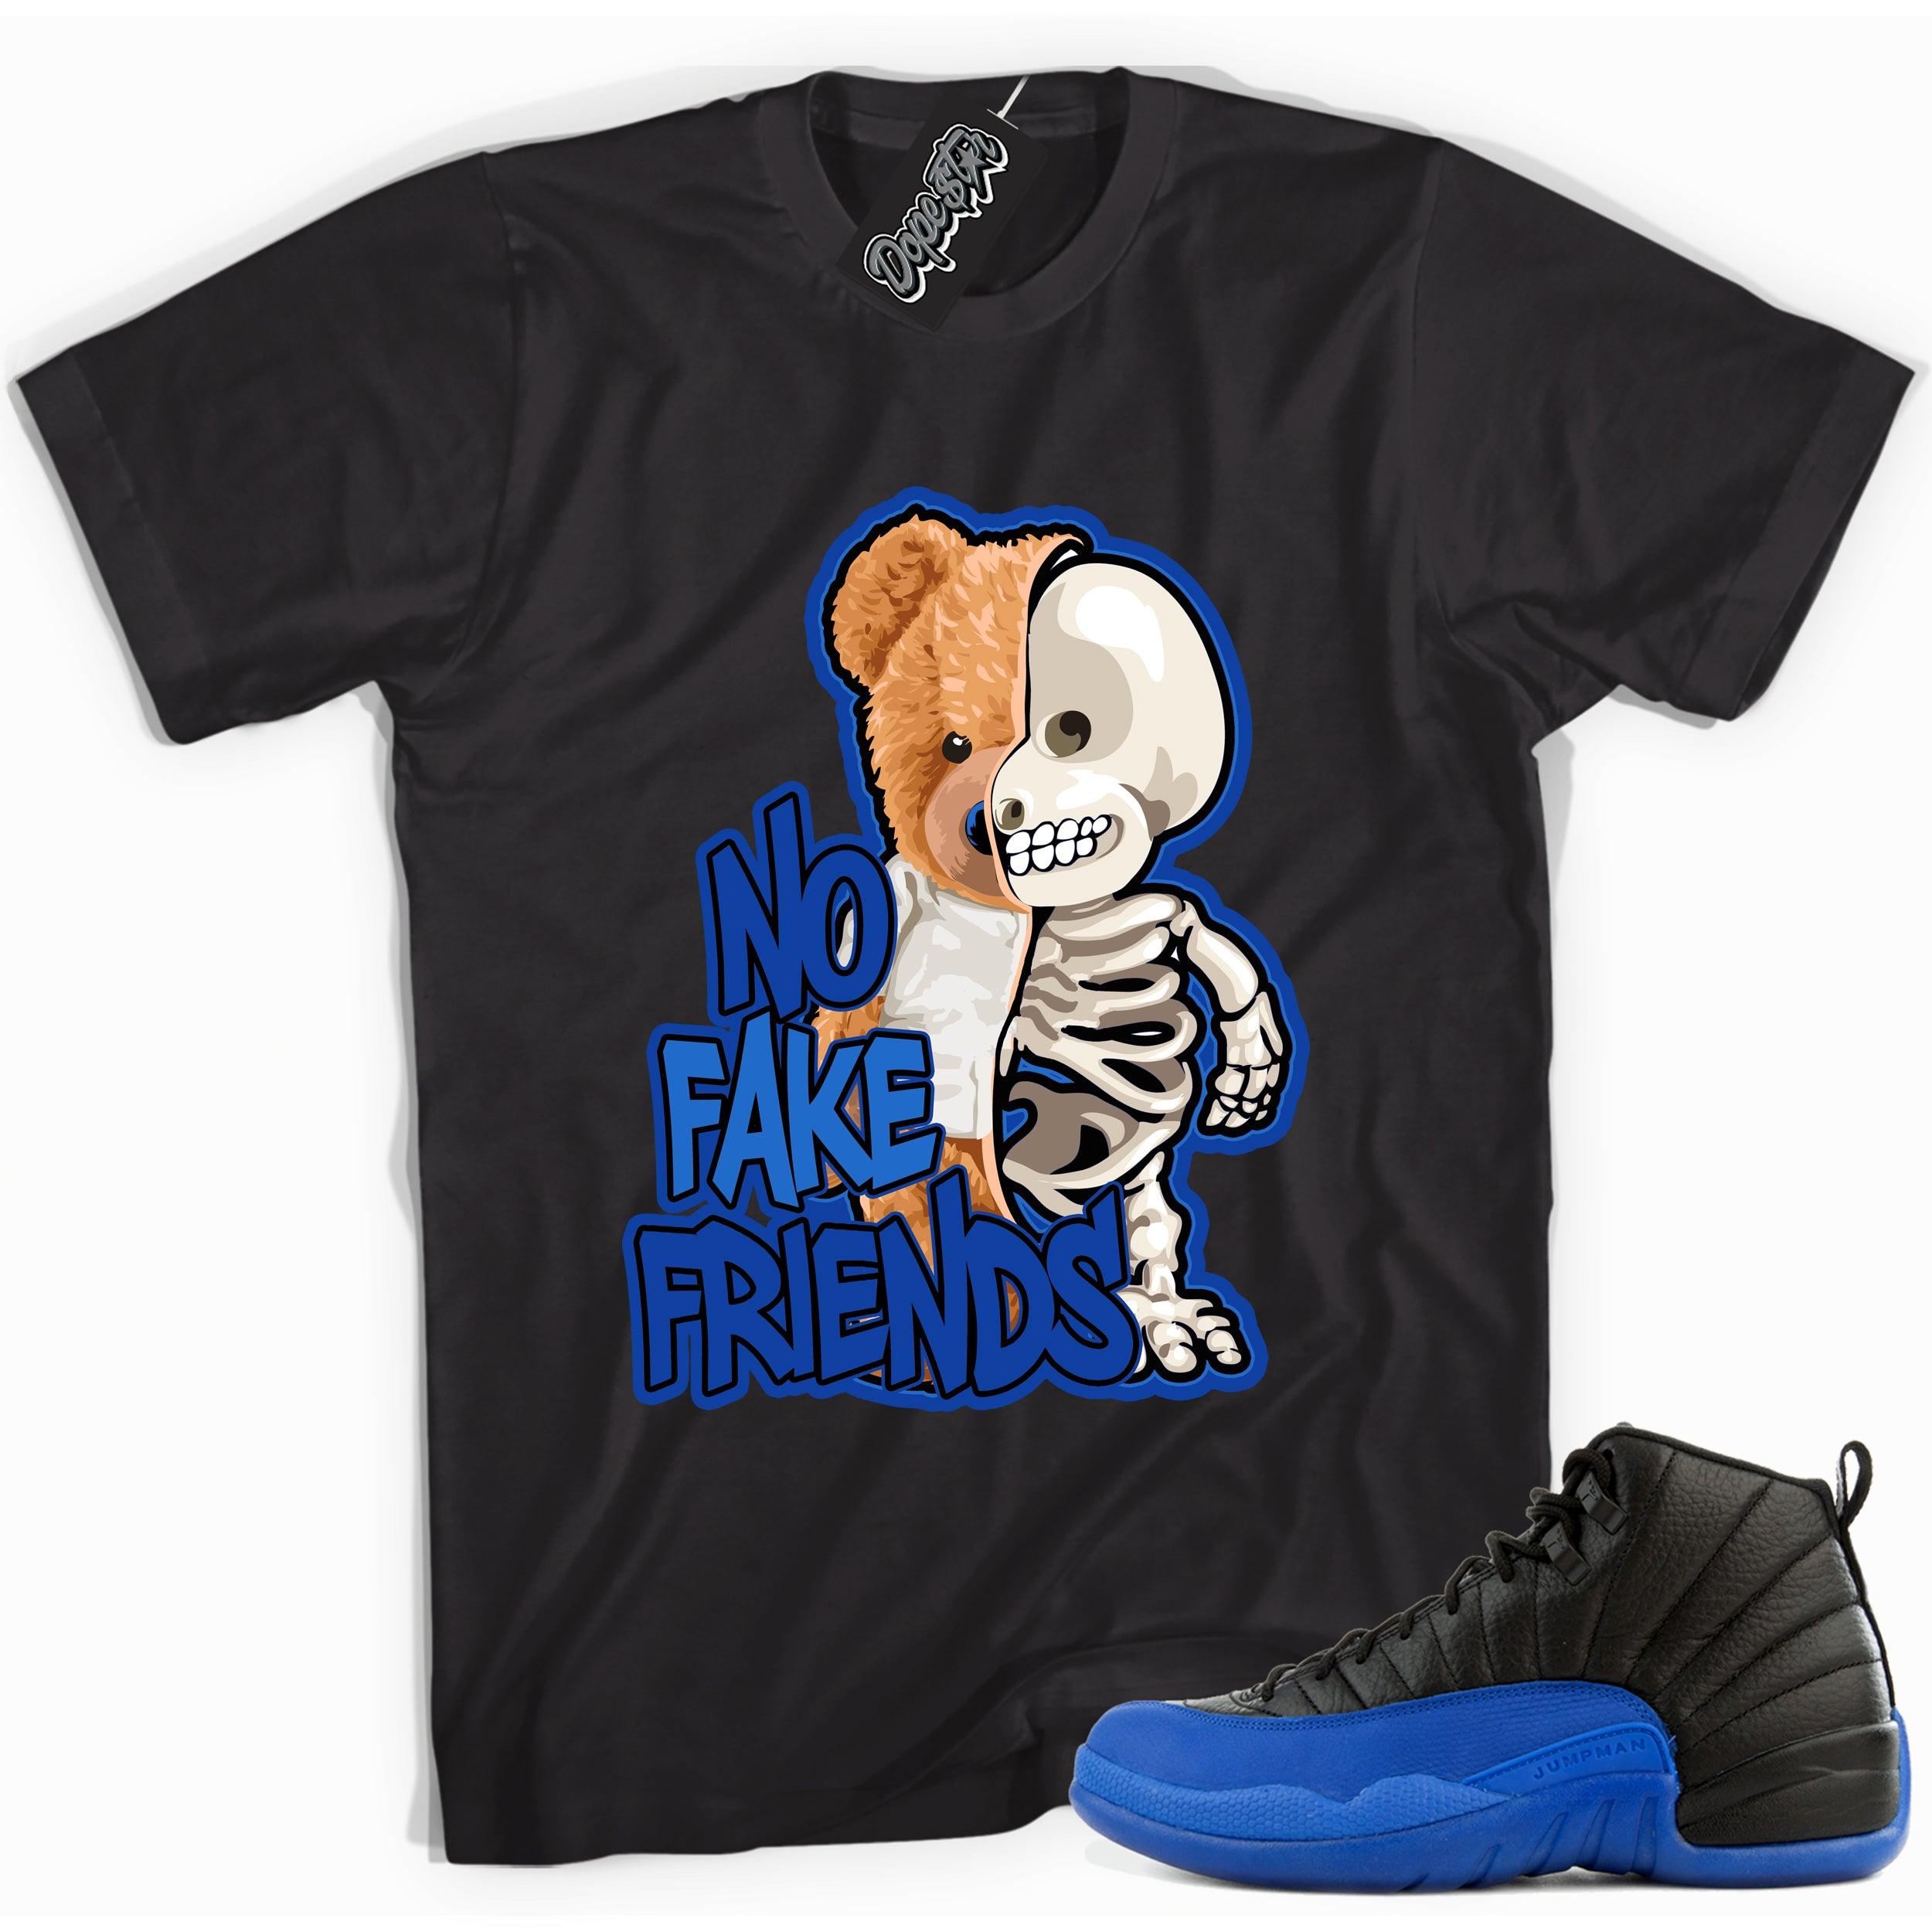 Cool black graphic tee with 'no fake friends' print, that perfectly matches  Air Jordan 12 Retro Black Game Royal sneakers.